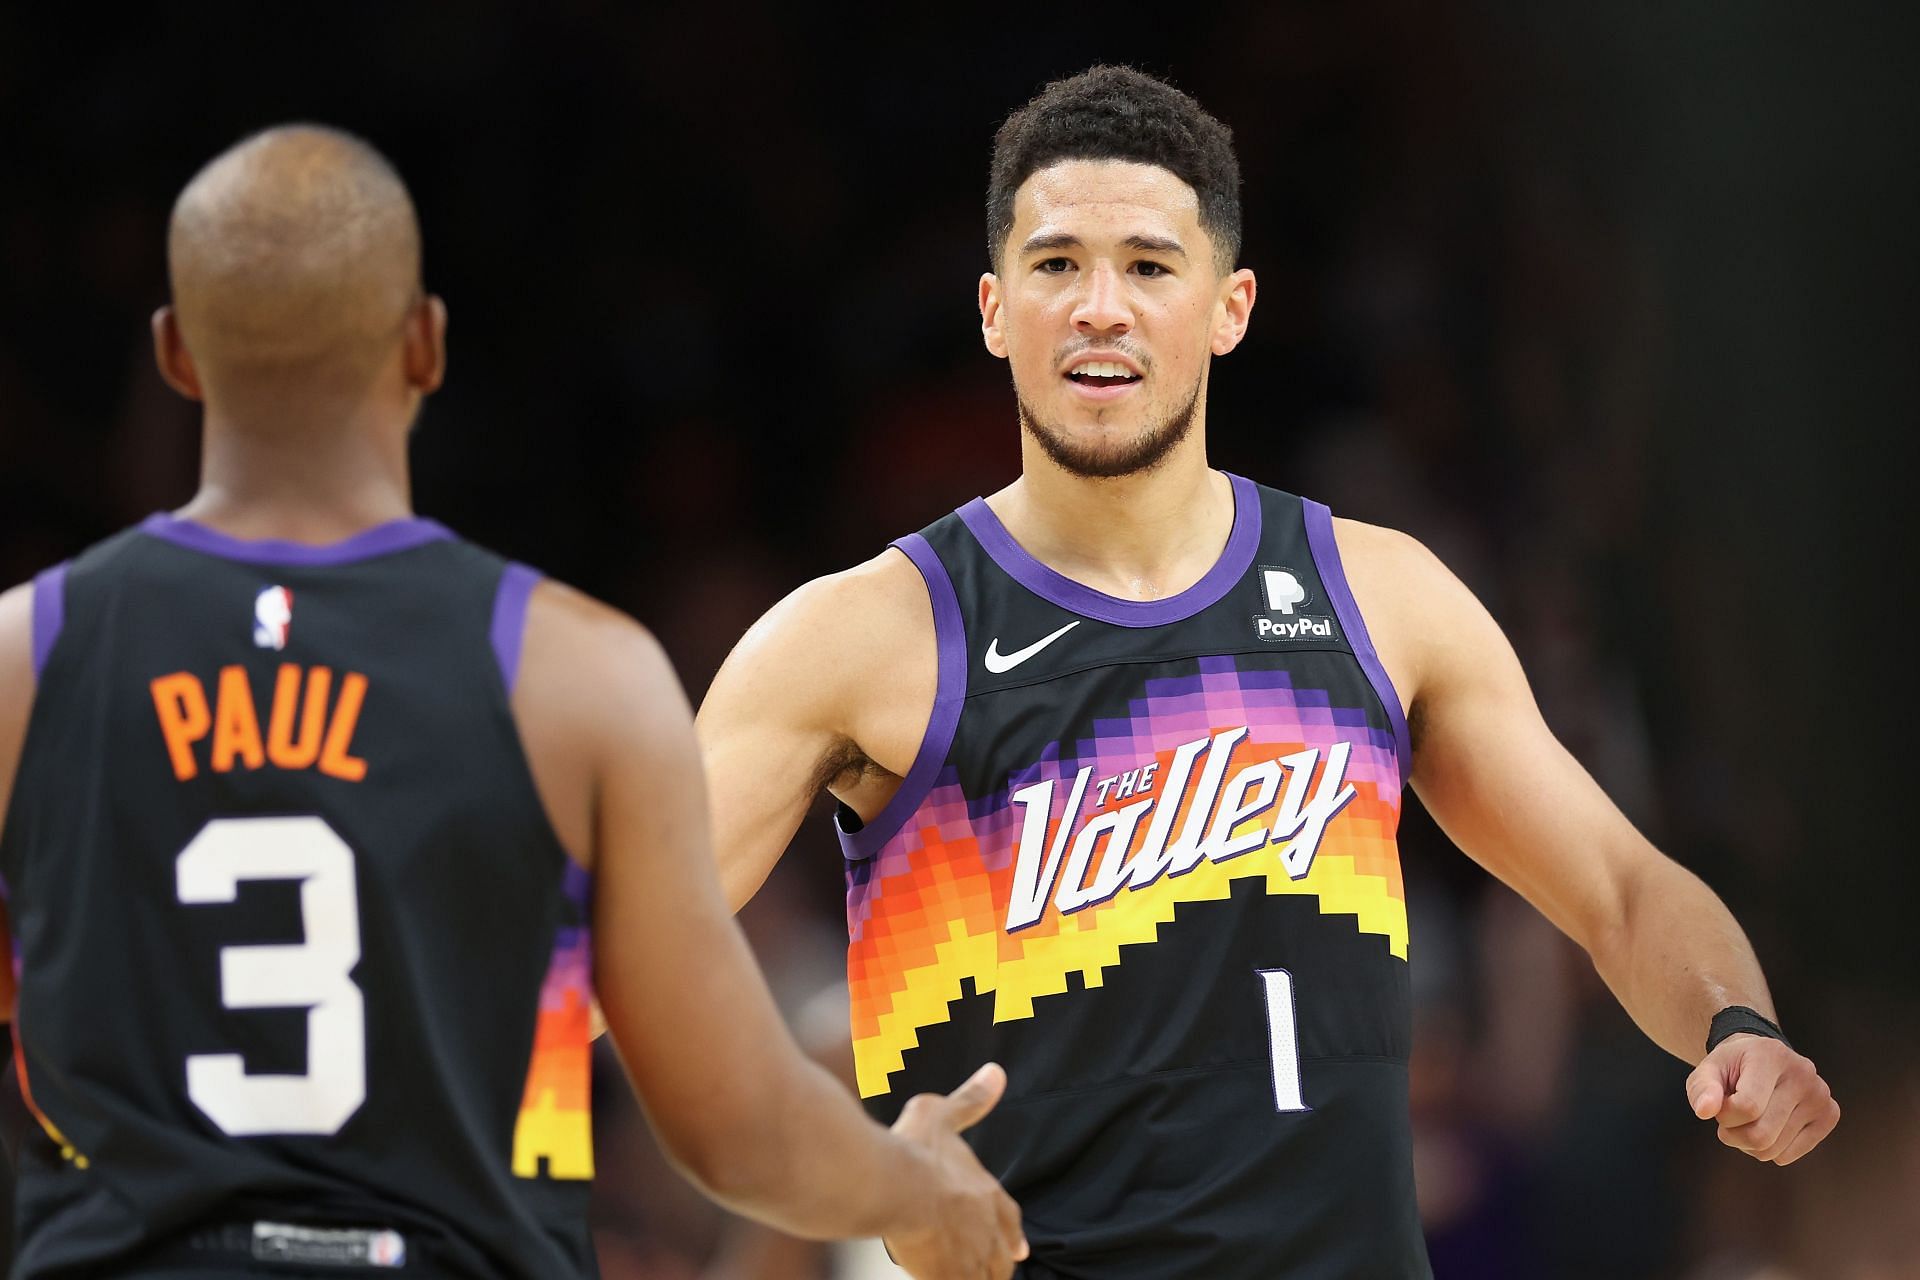 Chris Paul and Devin Booker in action for Game 1 against the Mavericks